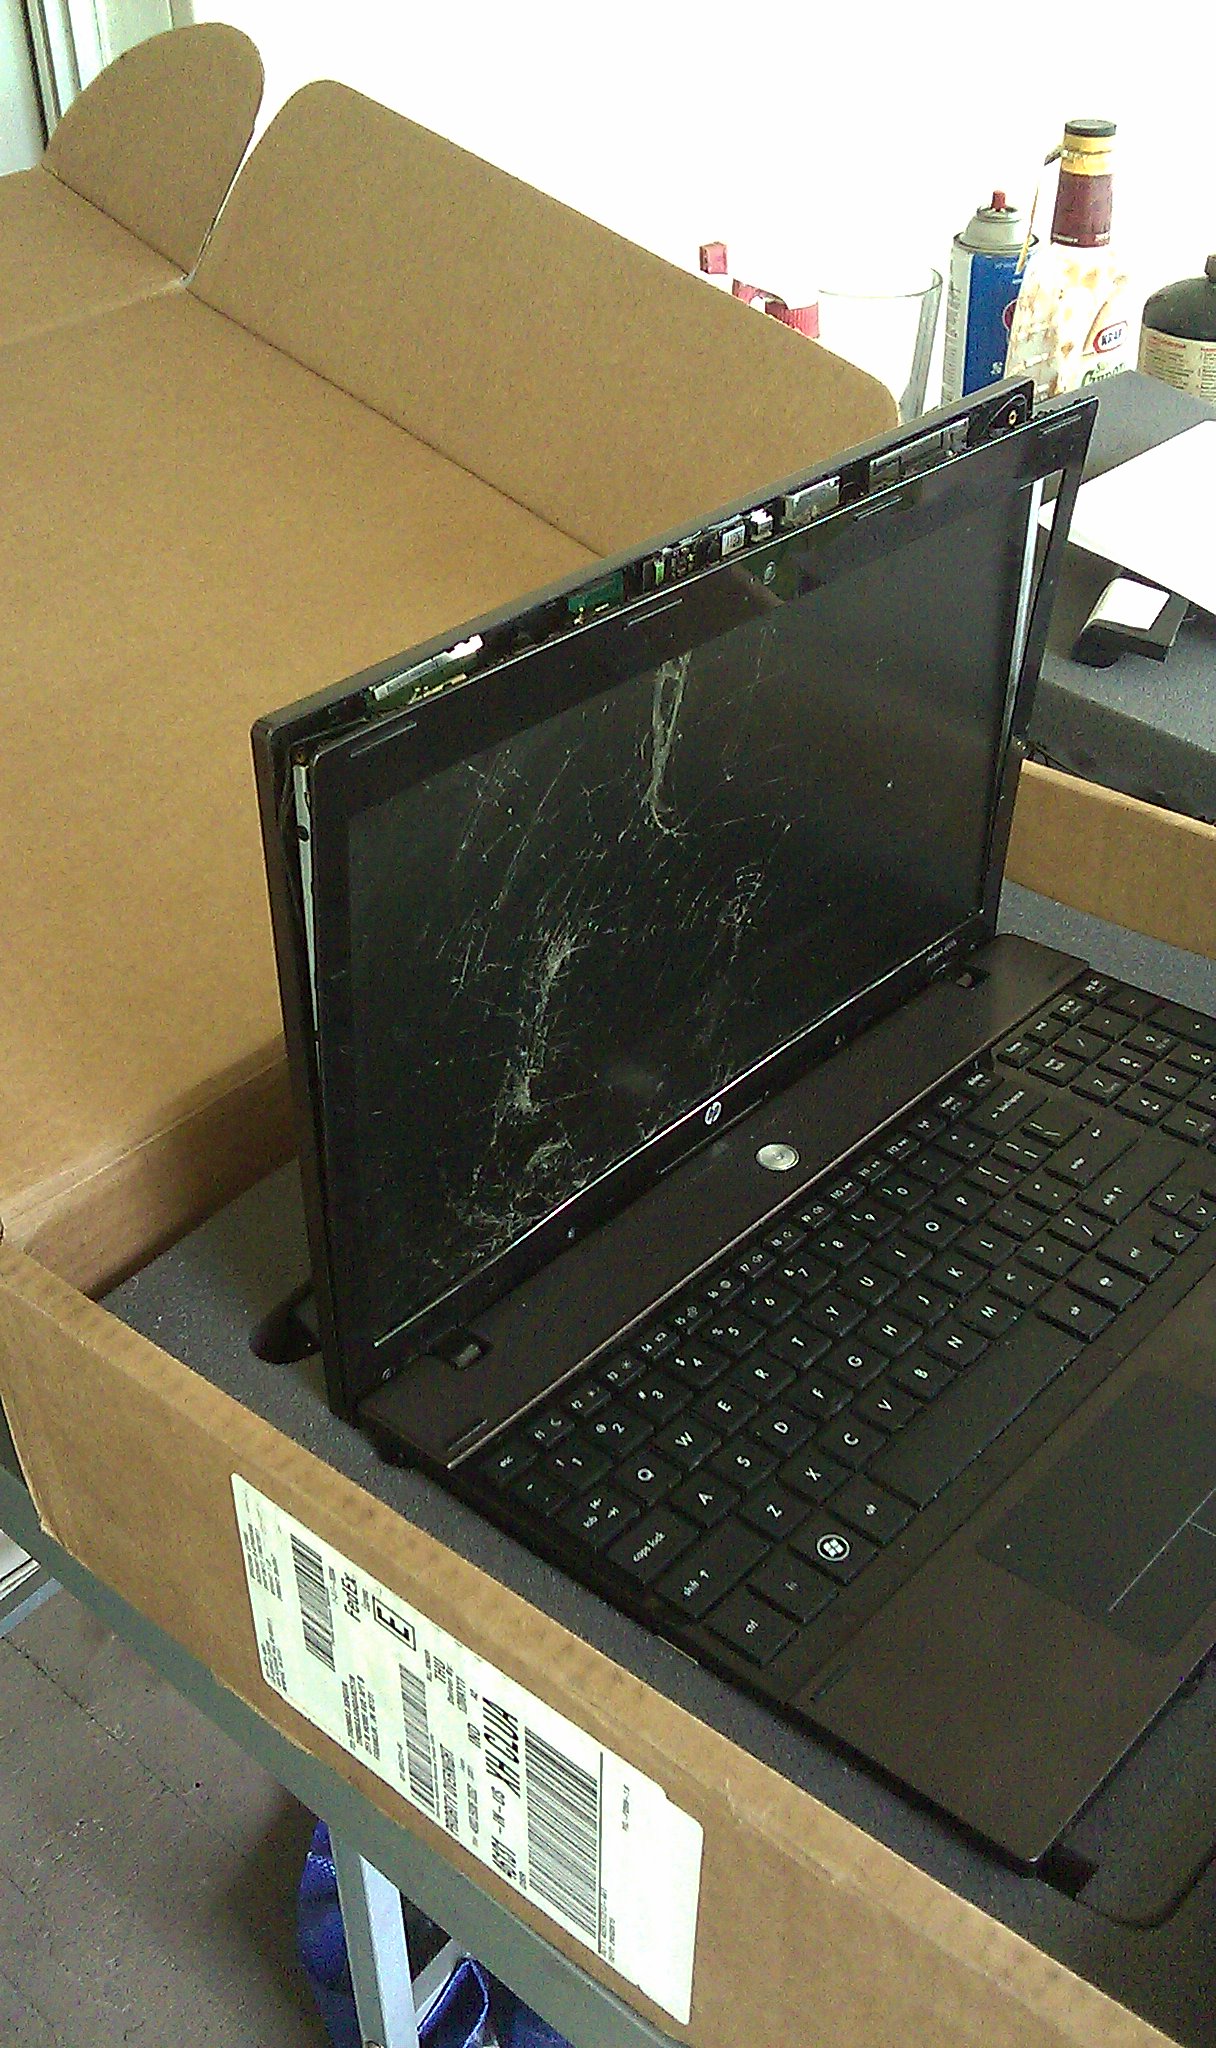 This is the quality of work the HP repair facility does